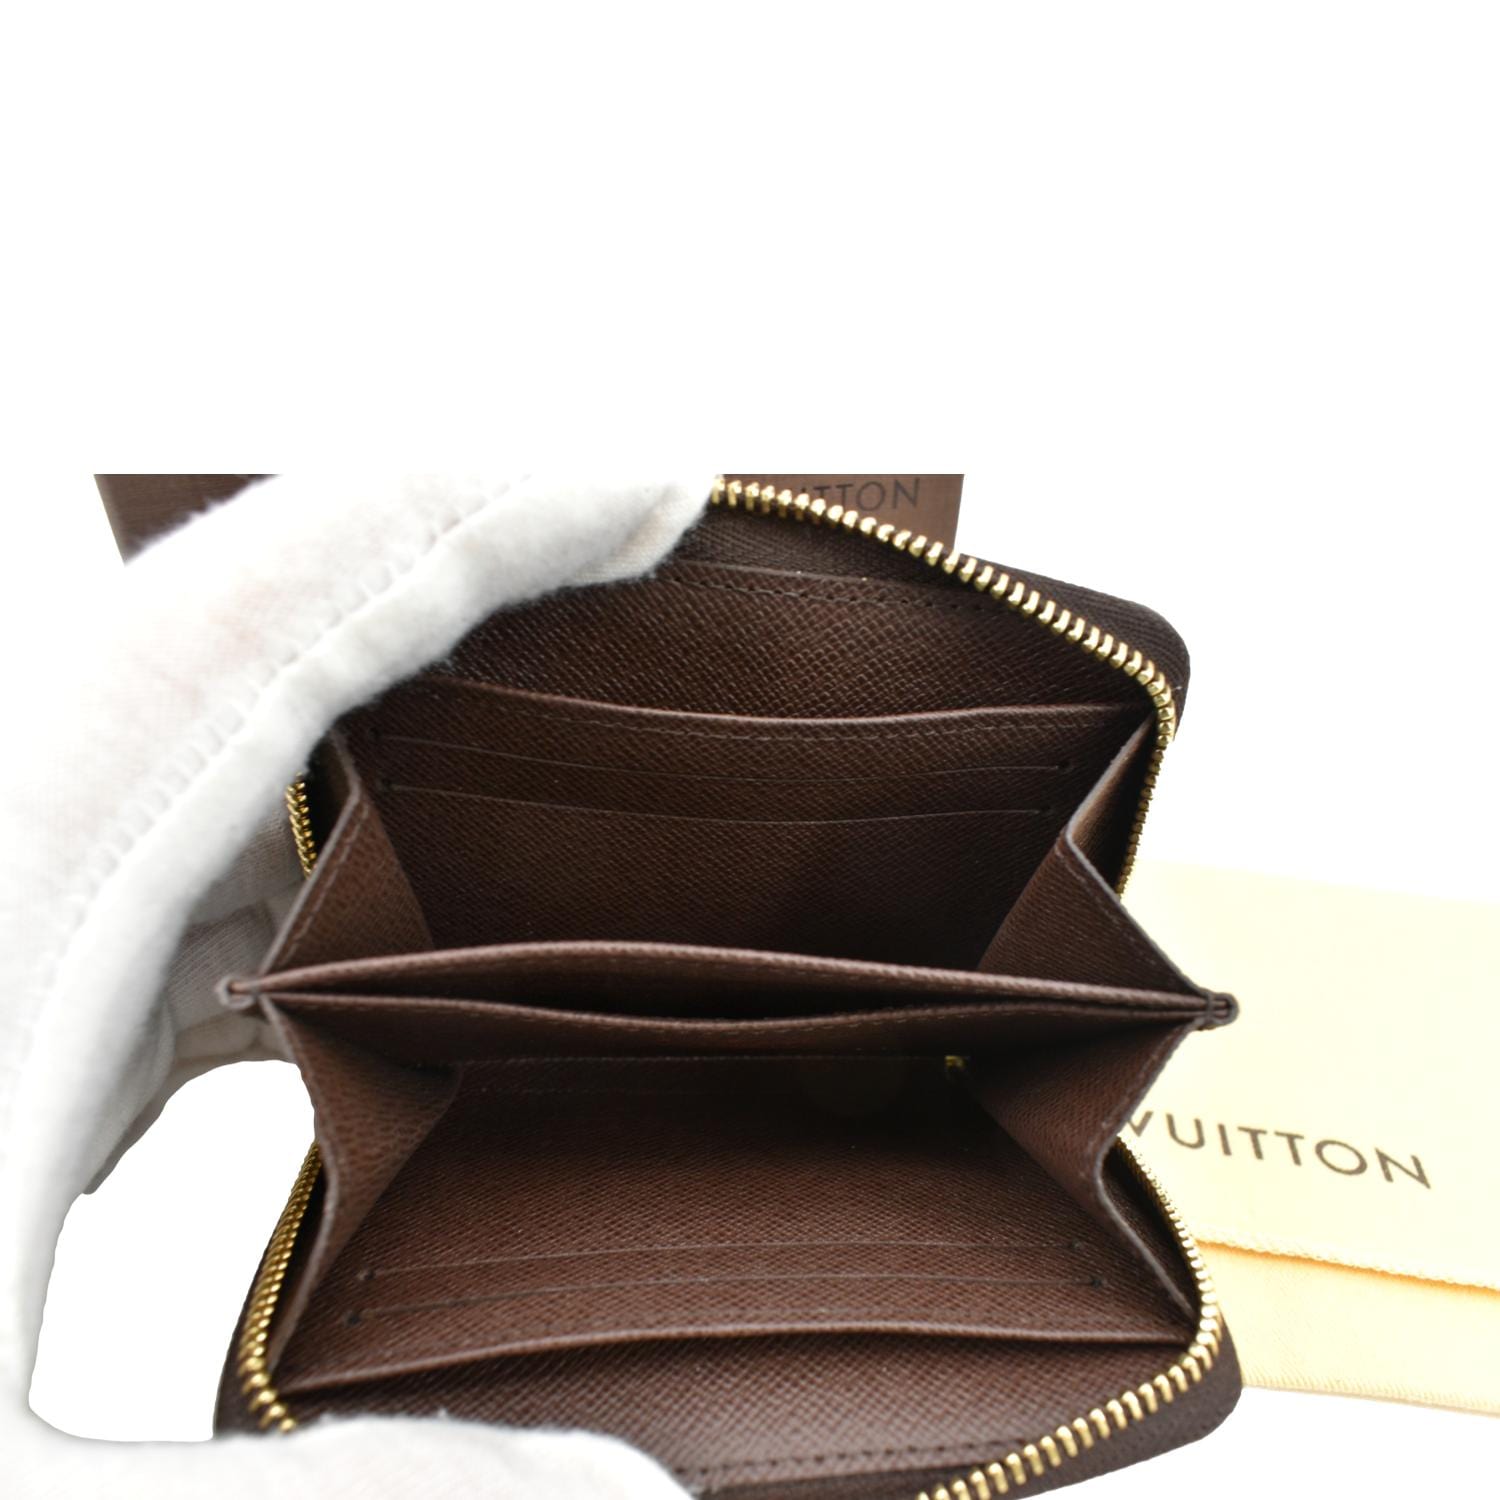 Products by Louis Vuitton: Zippy Coin Purse  Louis vuitton wallet zippy, Louis  vuitton wallet, Coin purse